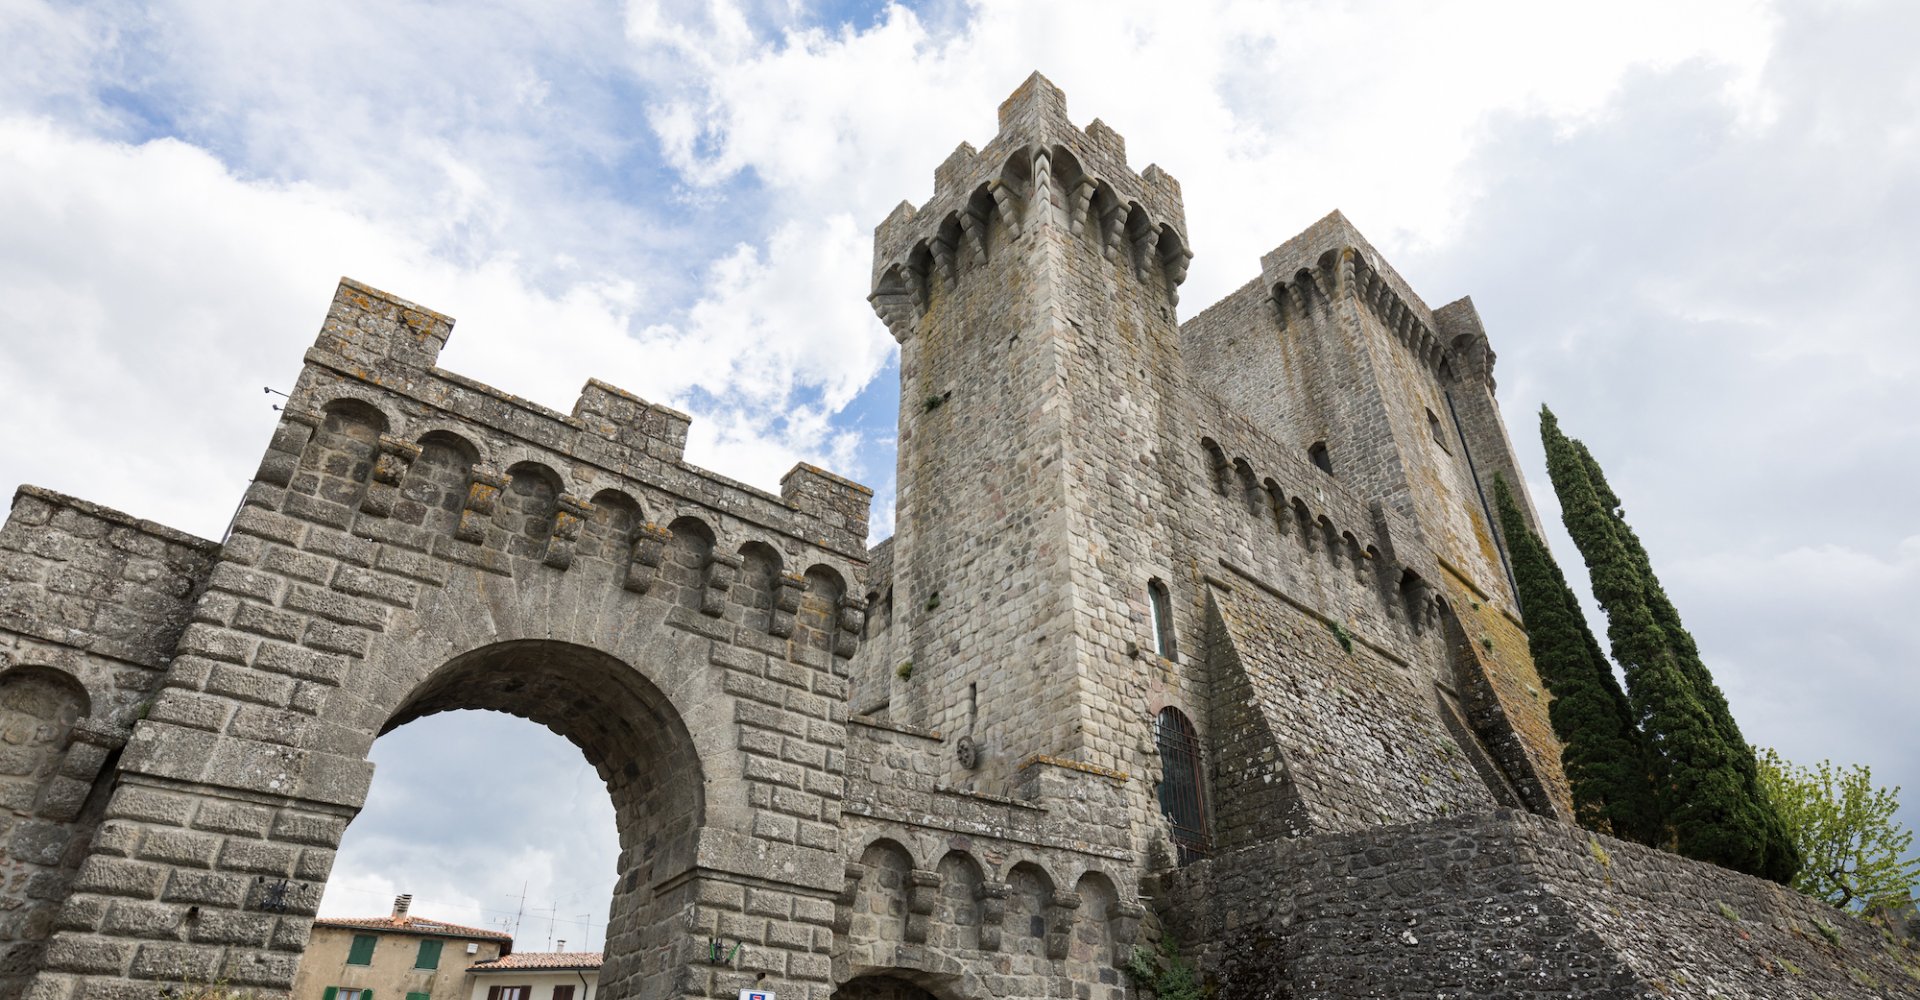 Medieval castle and tower in Piancastagnaio